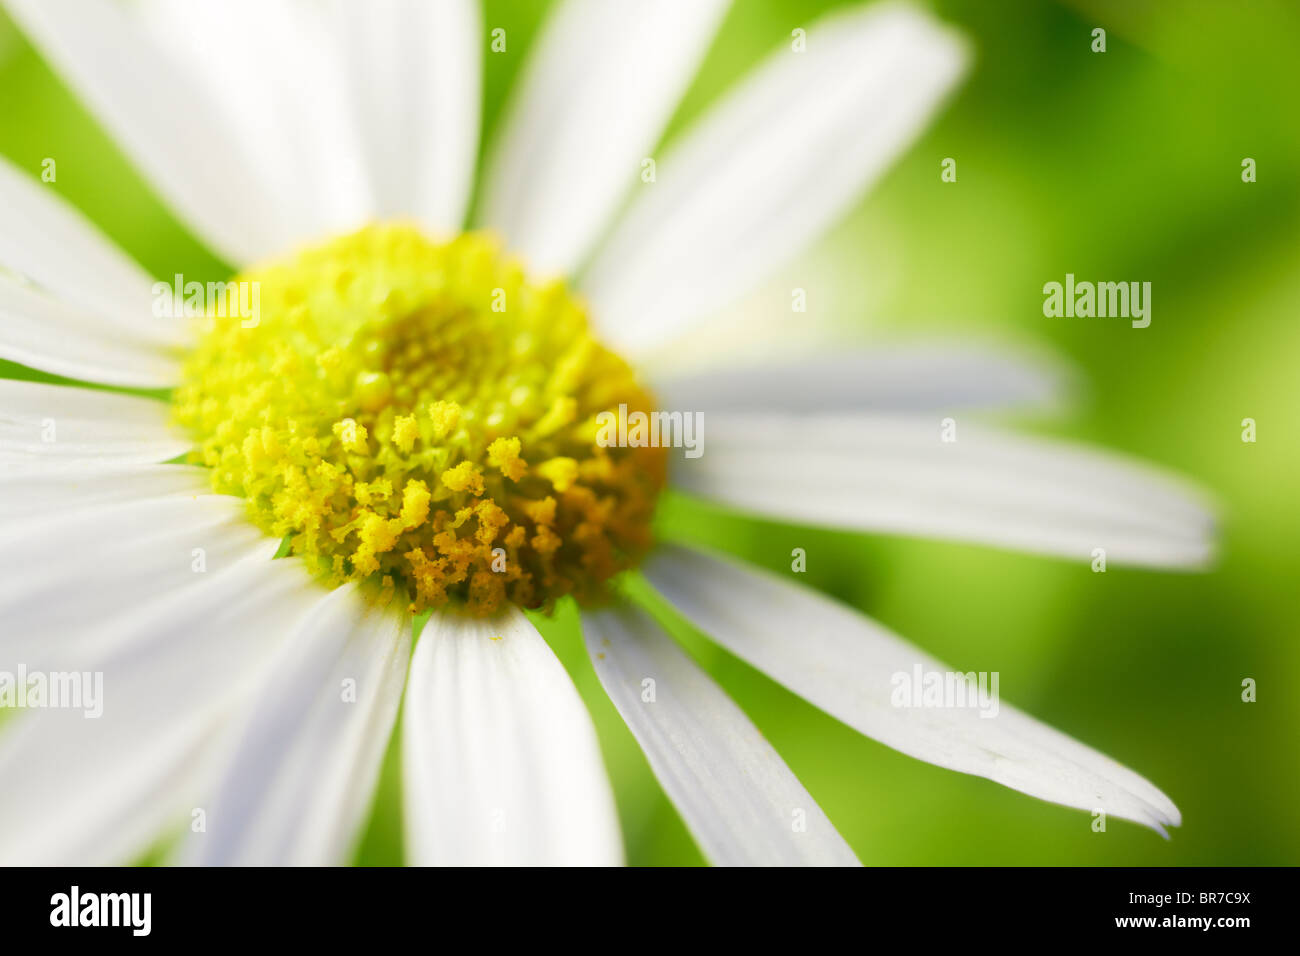 Chamomile flower. Closeup macro shot with shallow depth of field. Stock Photo